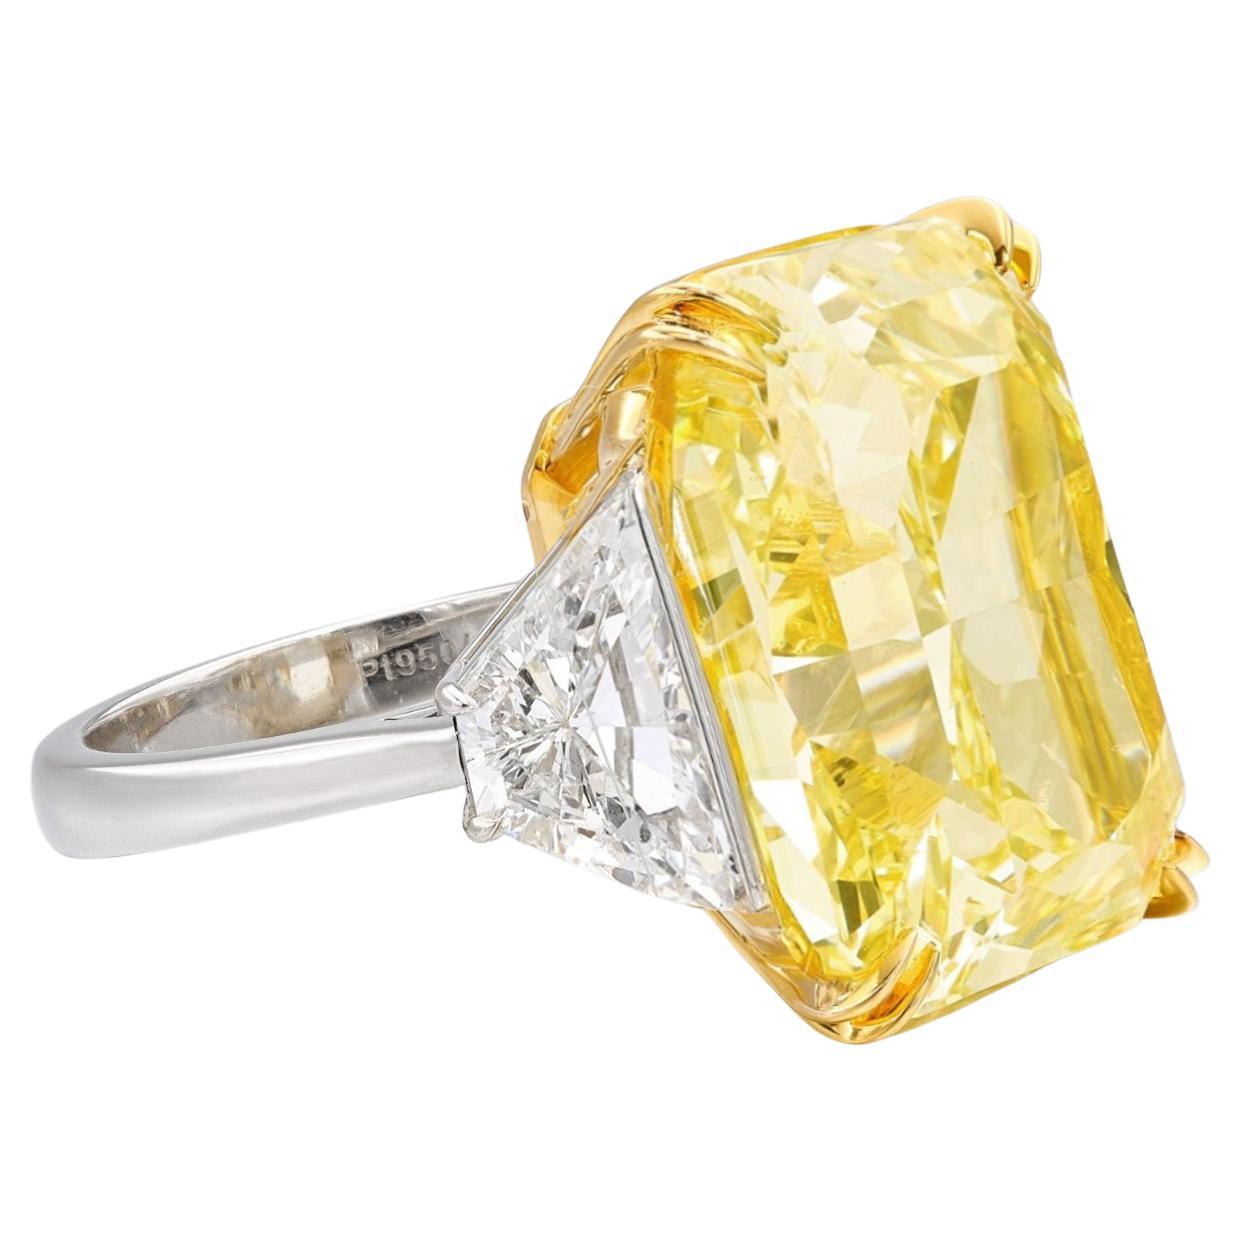 unparalleled luxury with our remarkable GIA Certified 27 Carat Cushion Modified Diamond. Graced with a captivating Fancy Yellow hue and boasting a IF clarity grade, this extraordinary gem radiates brilliance and sophistication. Meticulously